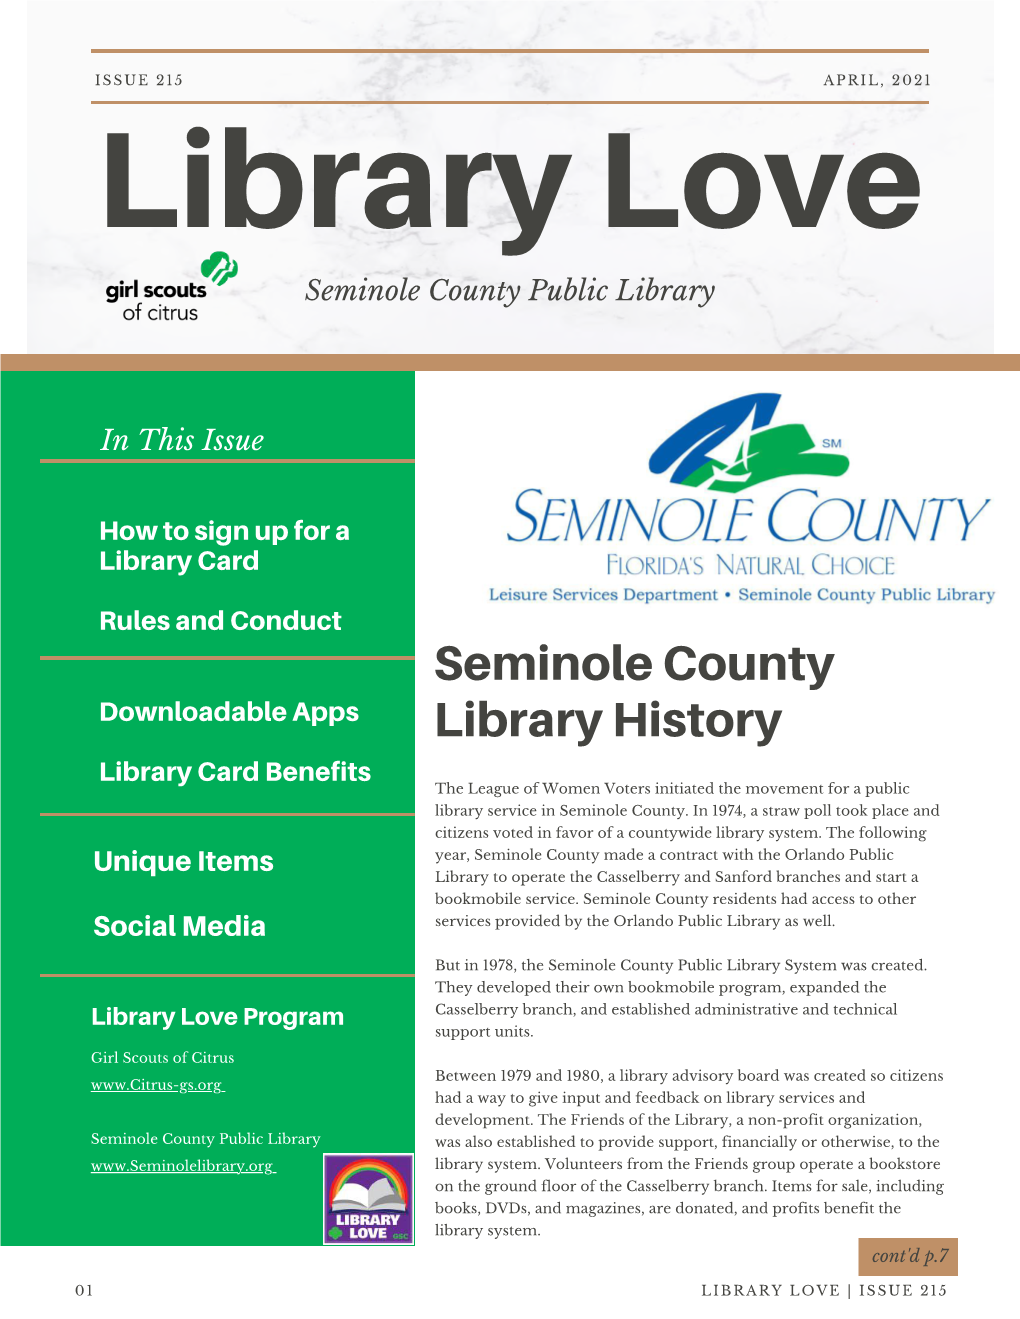 Seminole County Library Card Provides You with More Than Just Apps! Your Card Will Give You Access to Tools Beyond Your Imagination!